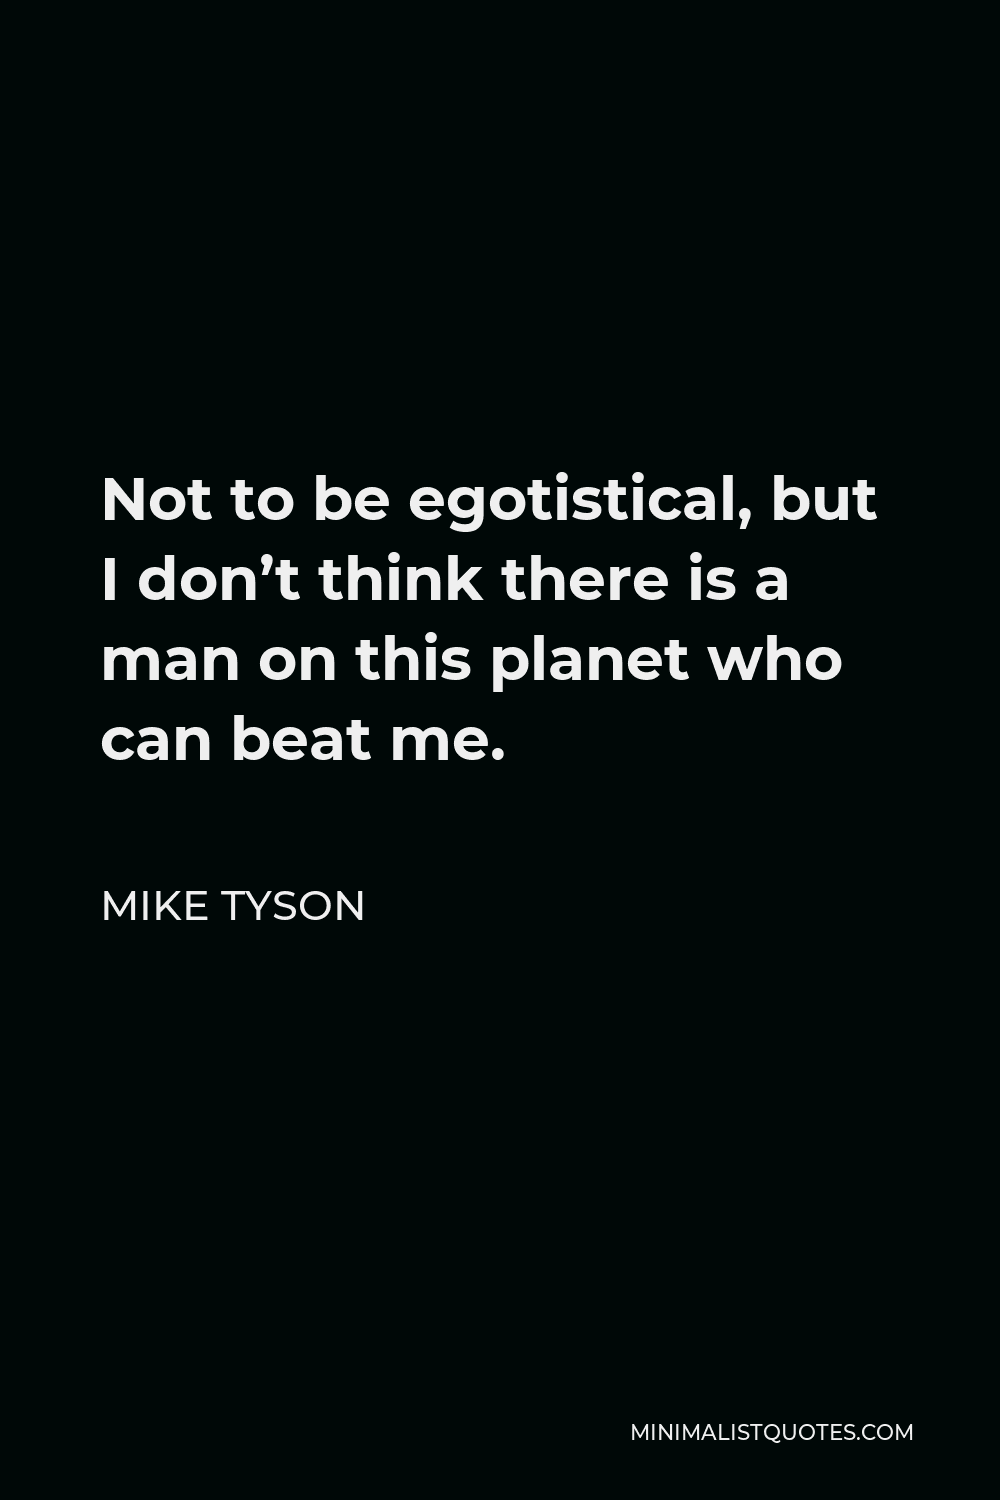 Mike Tyson Quote - Not to be egotistical, but I don’t think there is a man on this planet who can beat me.